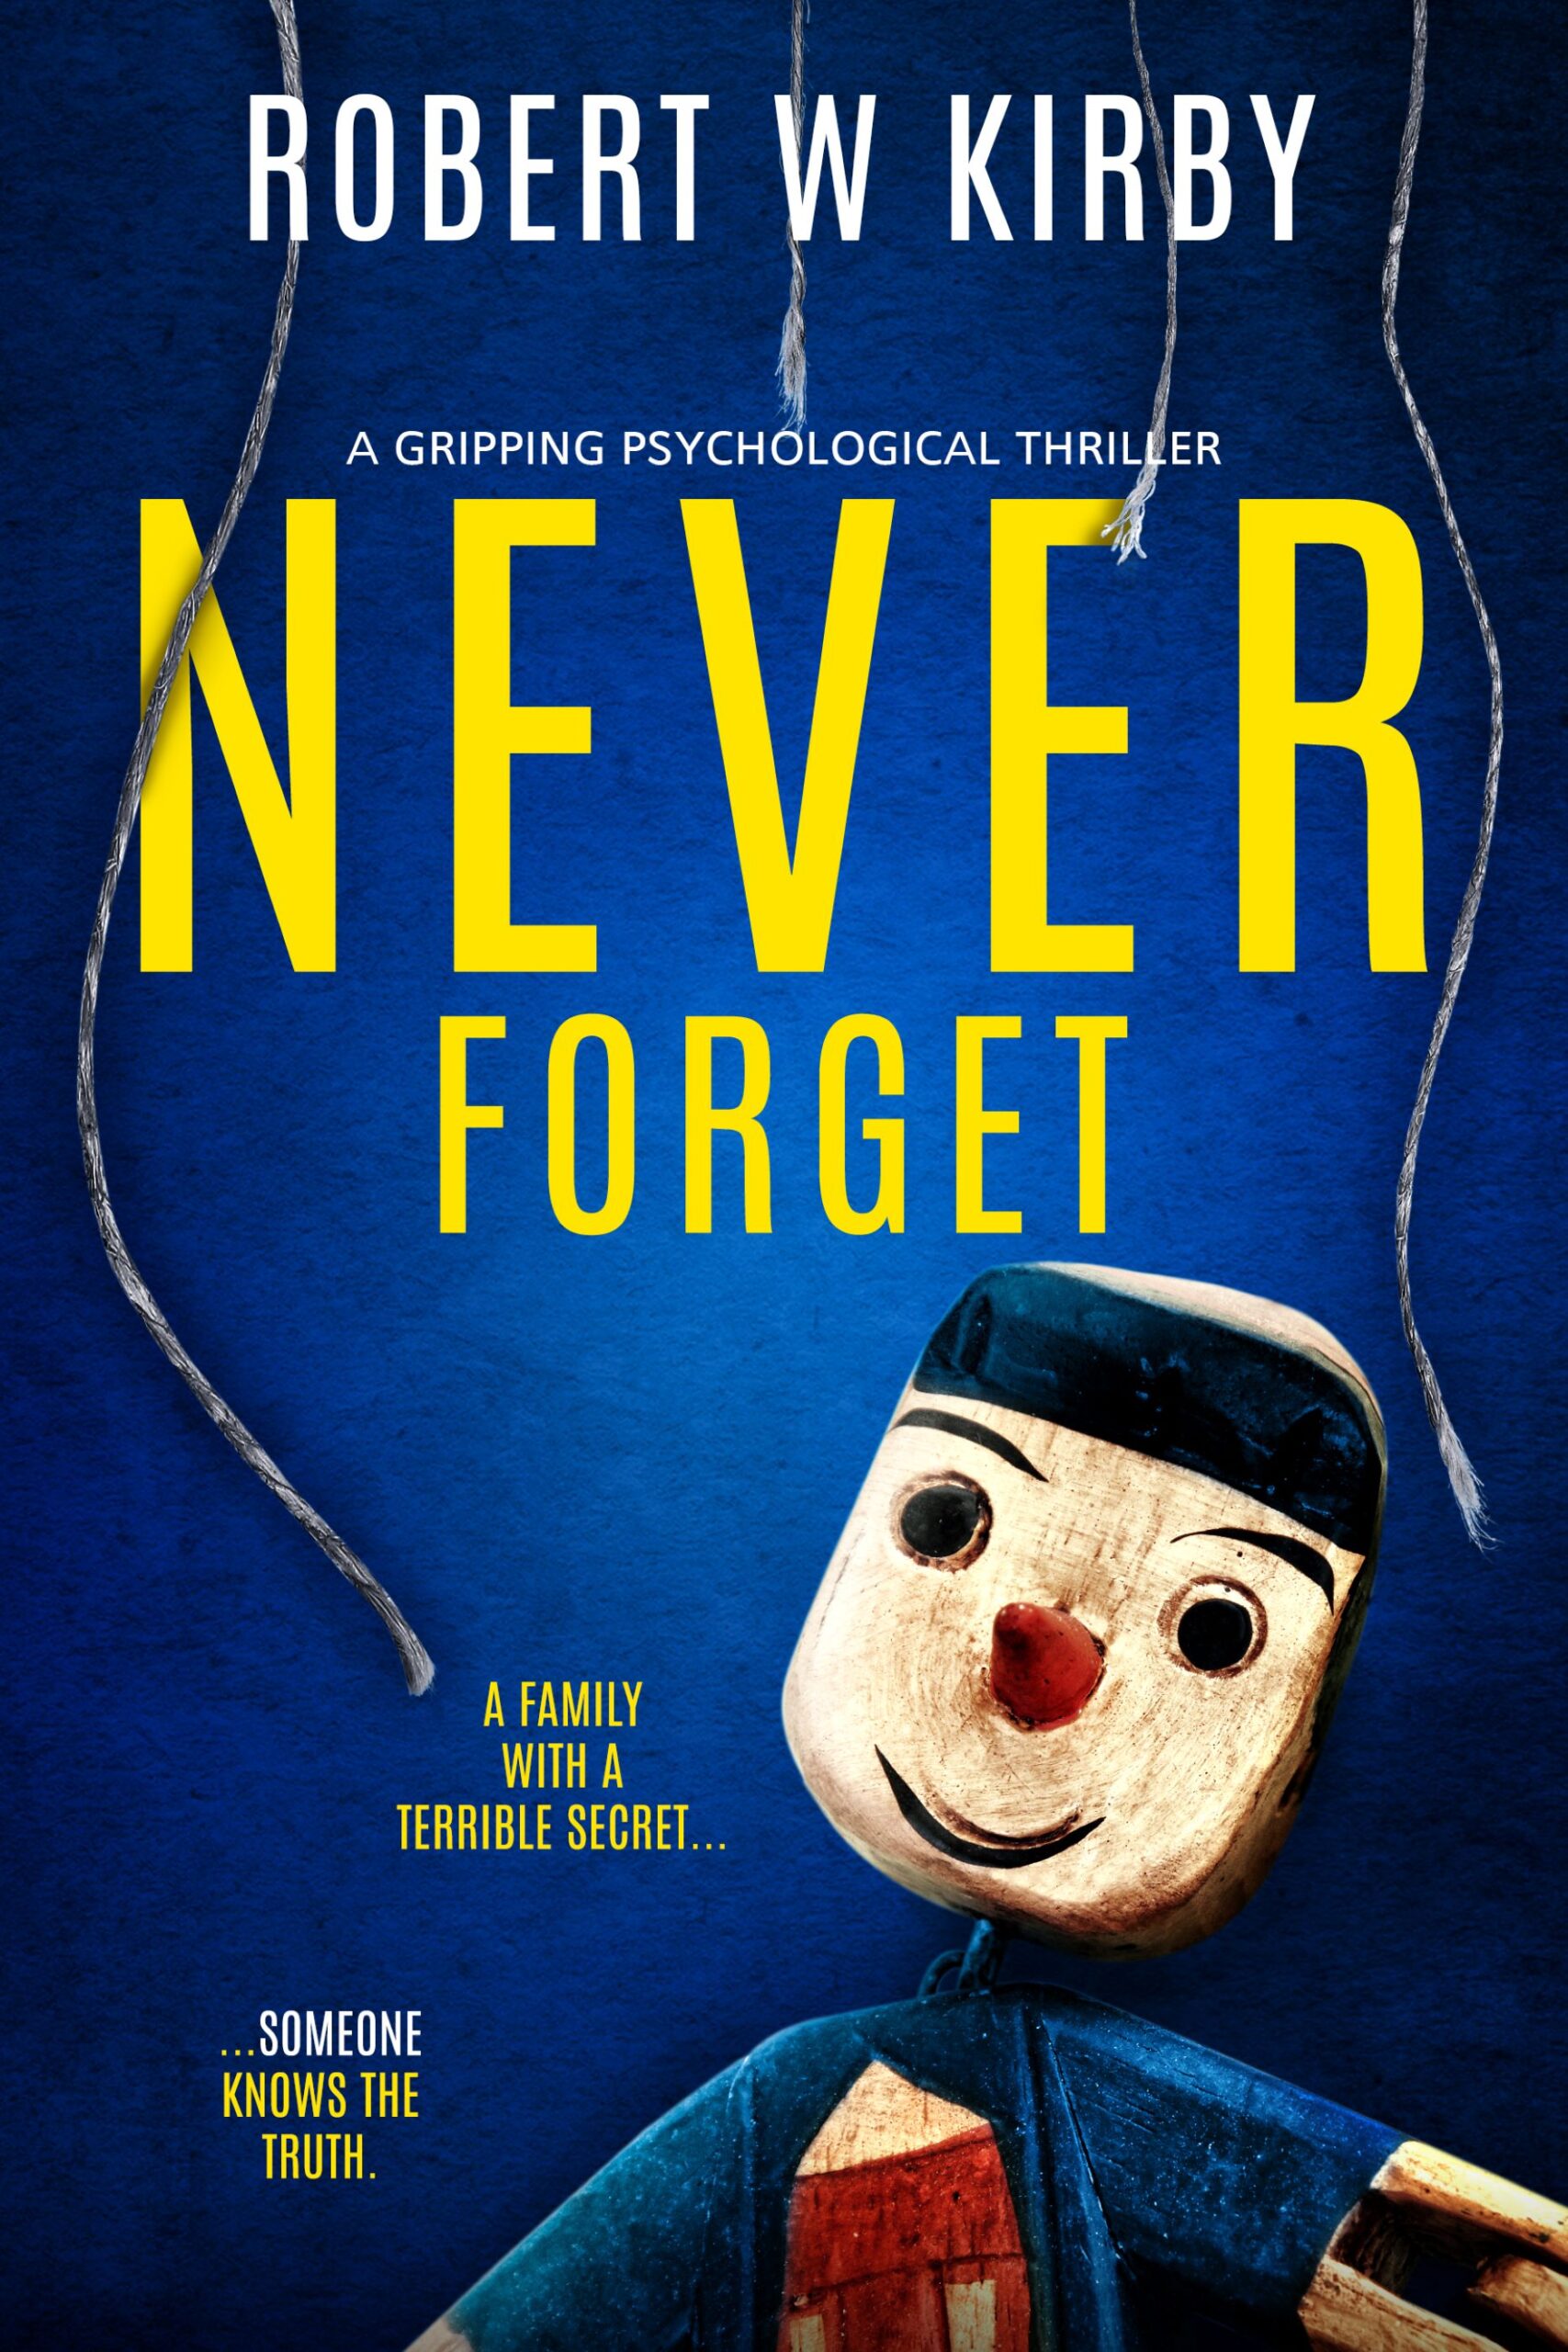 ROBERT W. KIRBY NEW RELEASE – NEVER FORGET